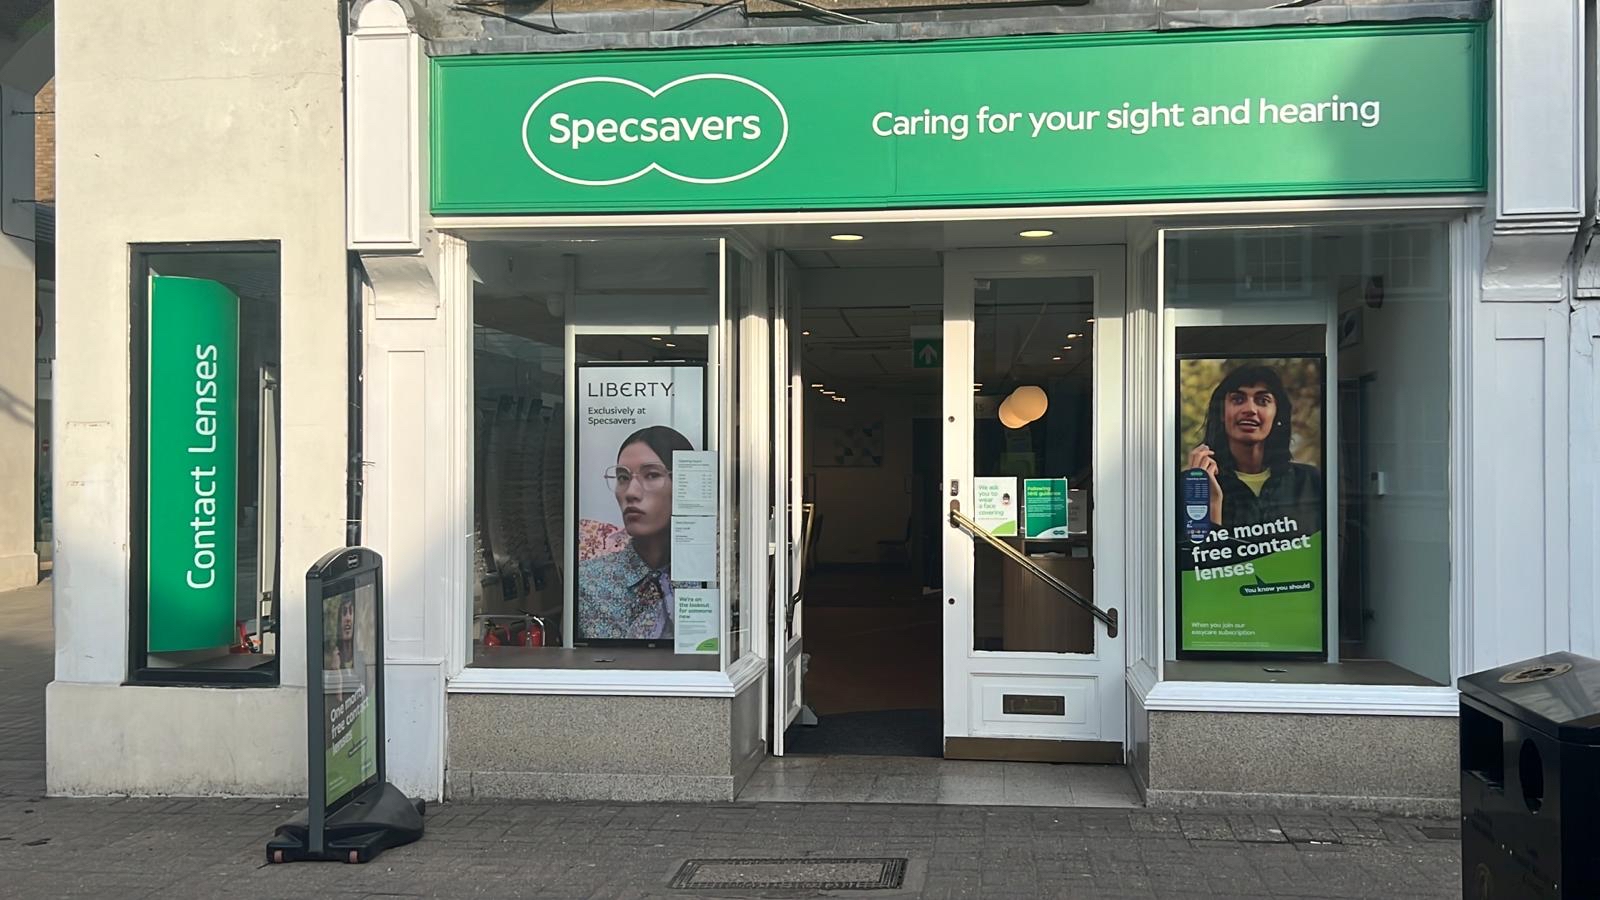 St Albans Specsavers Specsavers Opticians and Audiologists - St Albans St Albans 01727 848020